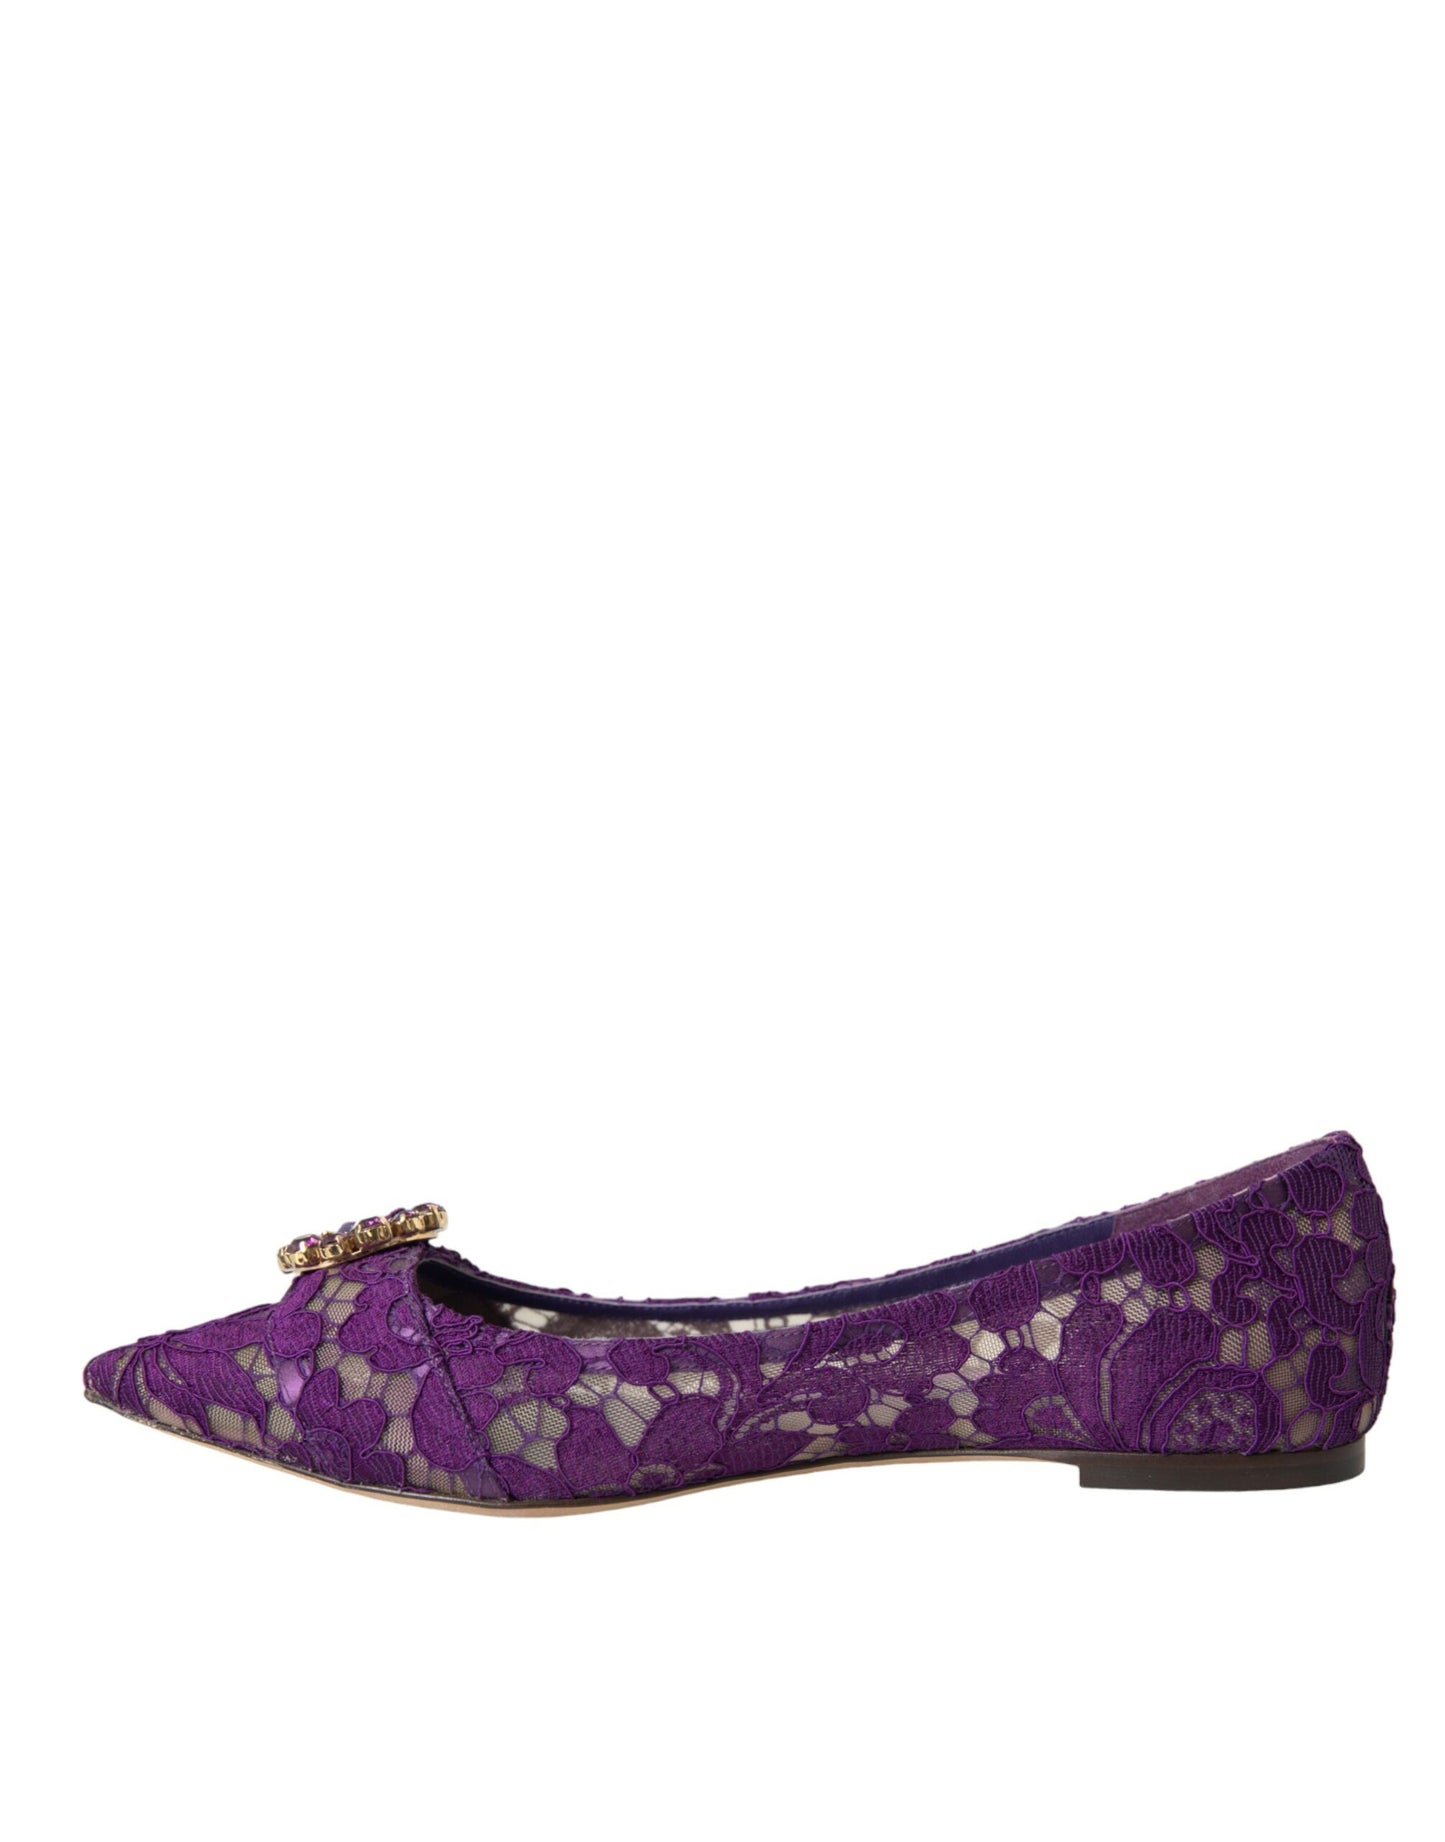 Dolce & Gabbana Purple Taormina Lace Crystal Loafers Shoes